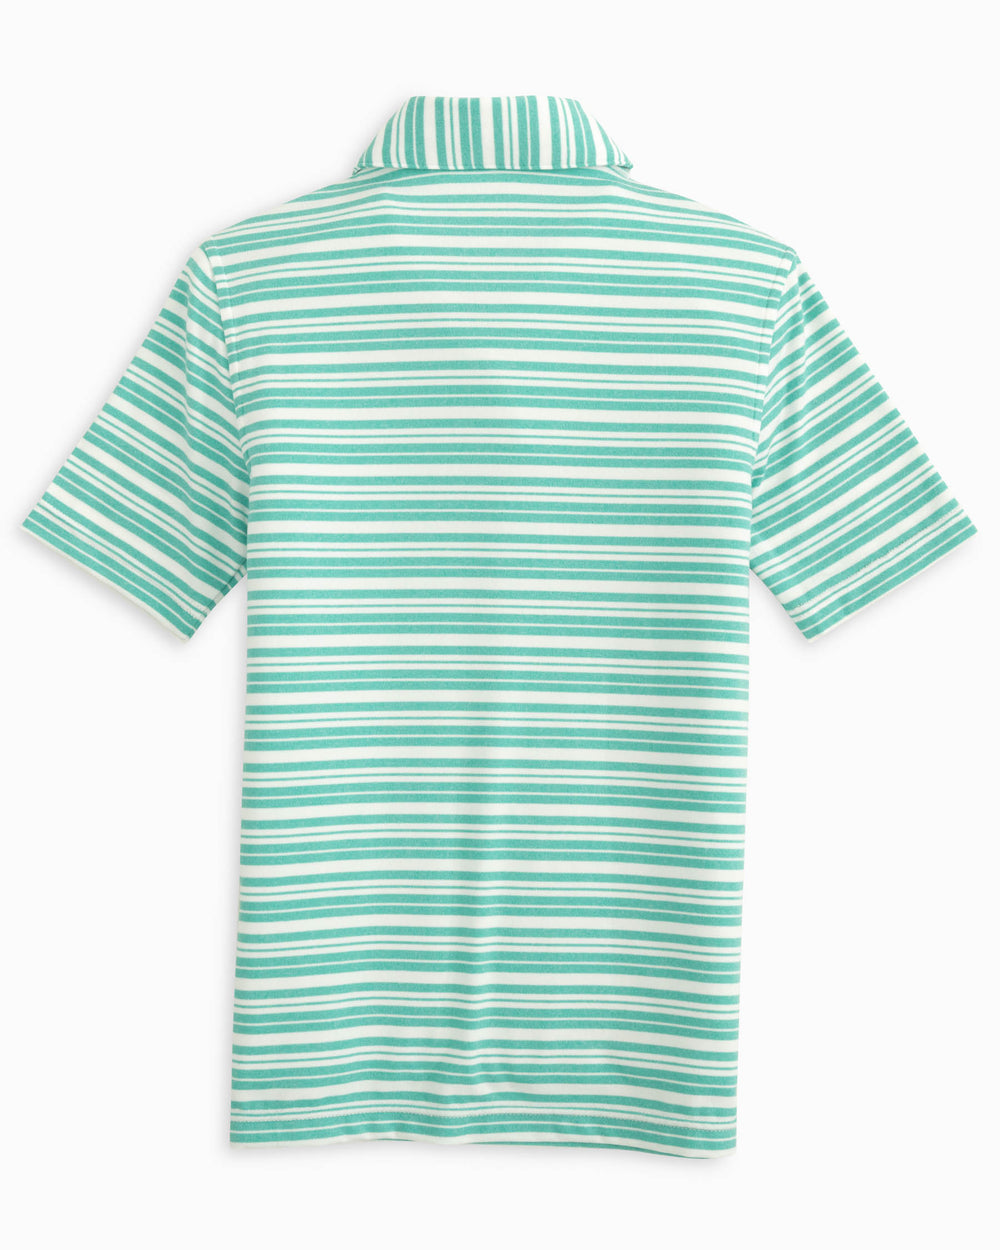 The back view of the Southern Tide Youth Ryder Heather Bombay Stripe Performance Polo Shirt by Southern Tide - Heather Tidal Wave